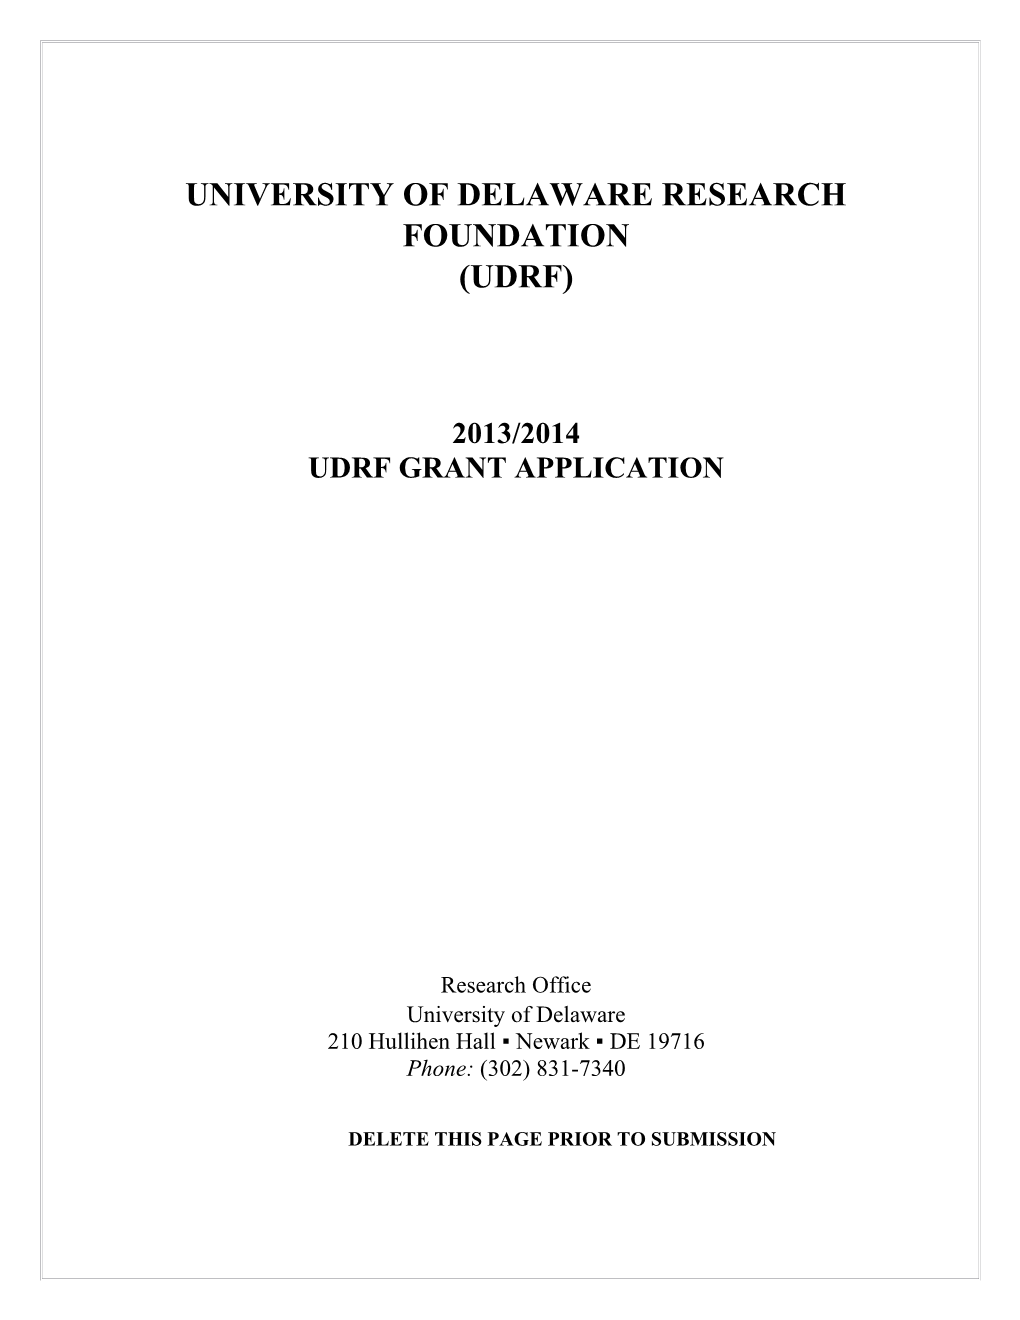 University of Delaware Research Foundation